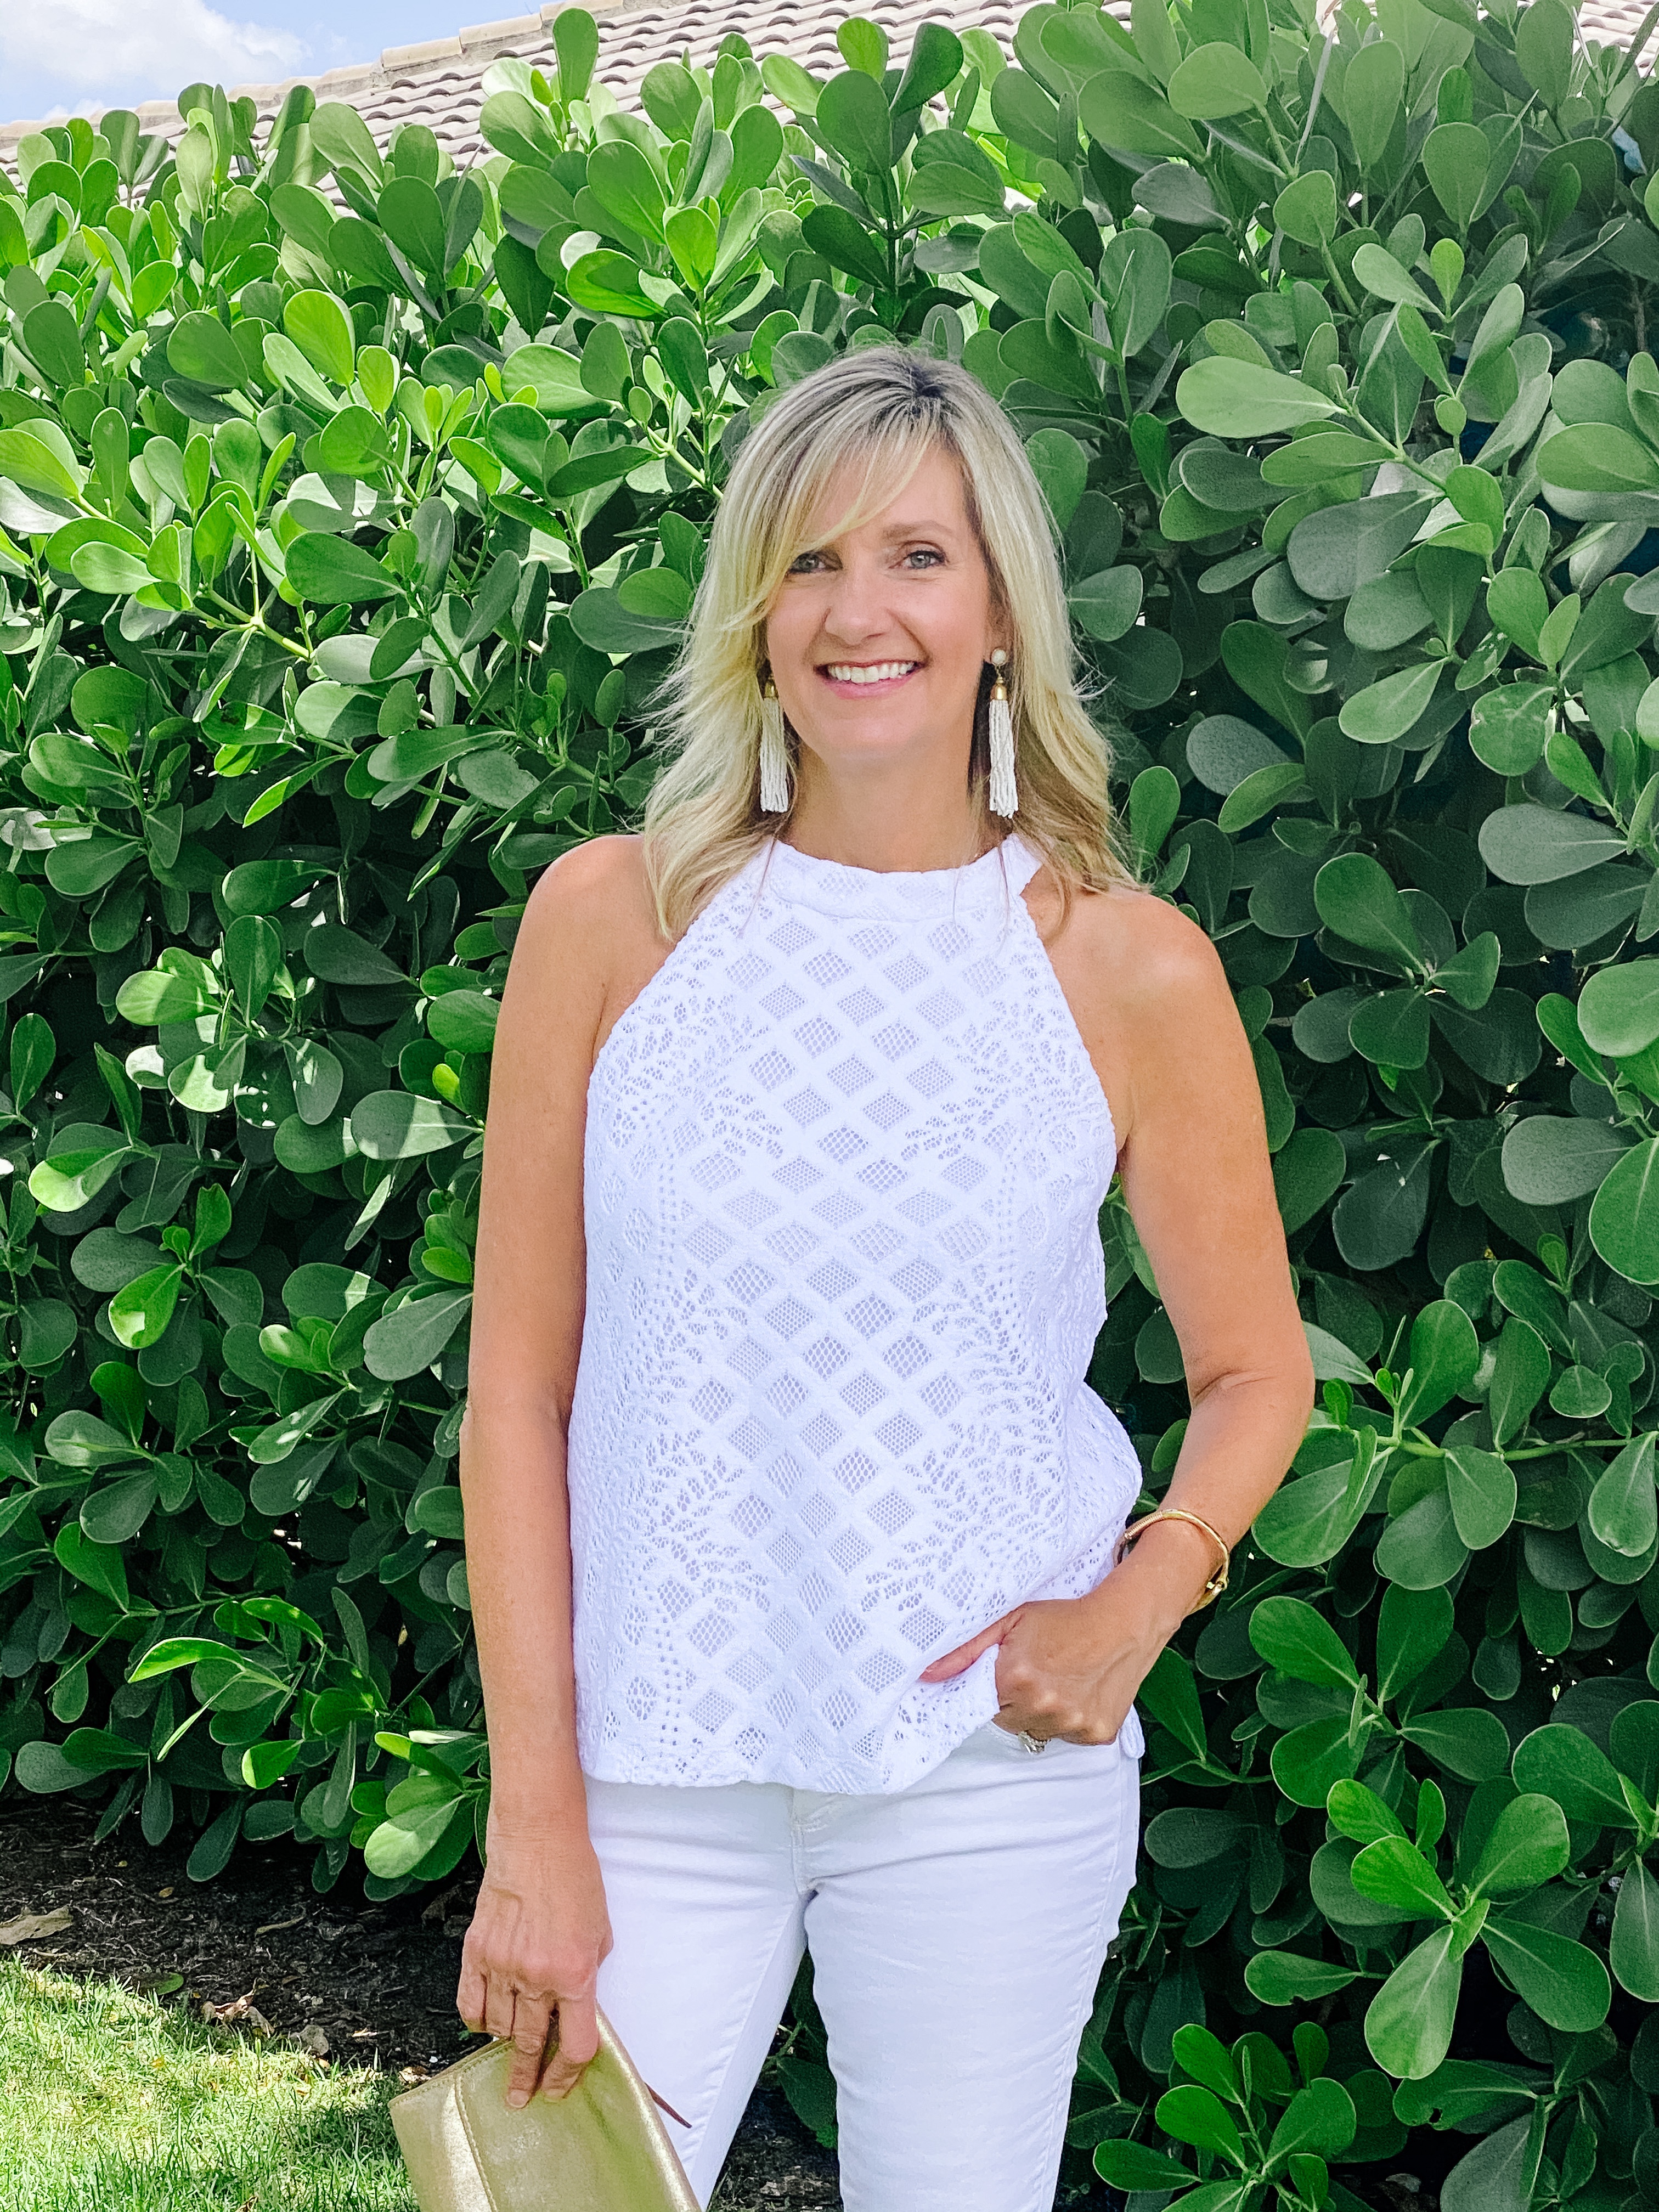 Lilly Pulitzer top and White Jeans For Date Night! 5 outfit ideas for women over 50.